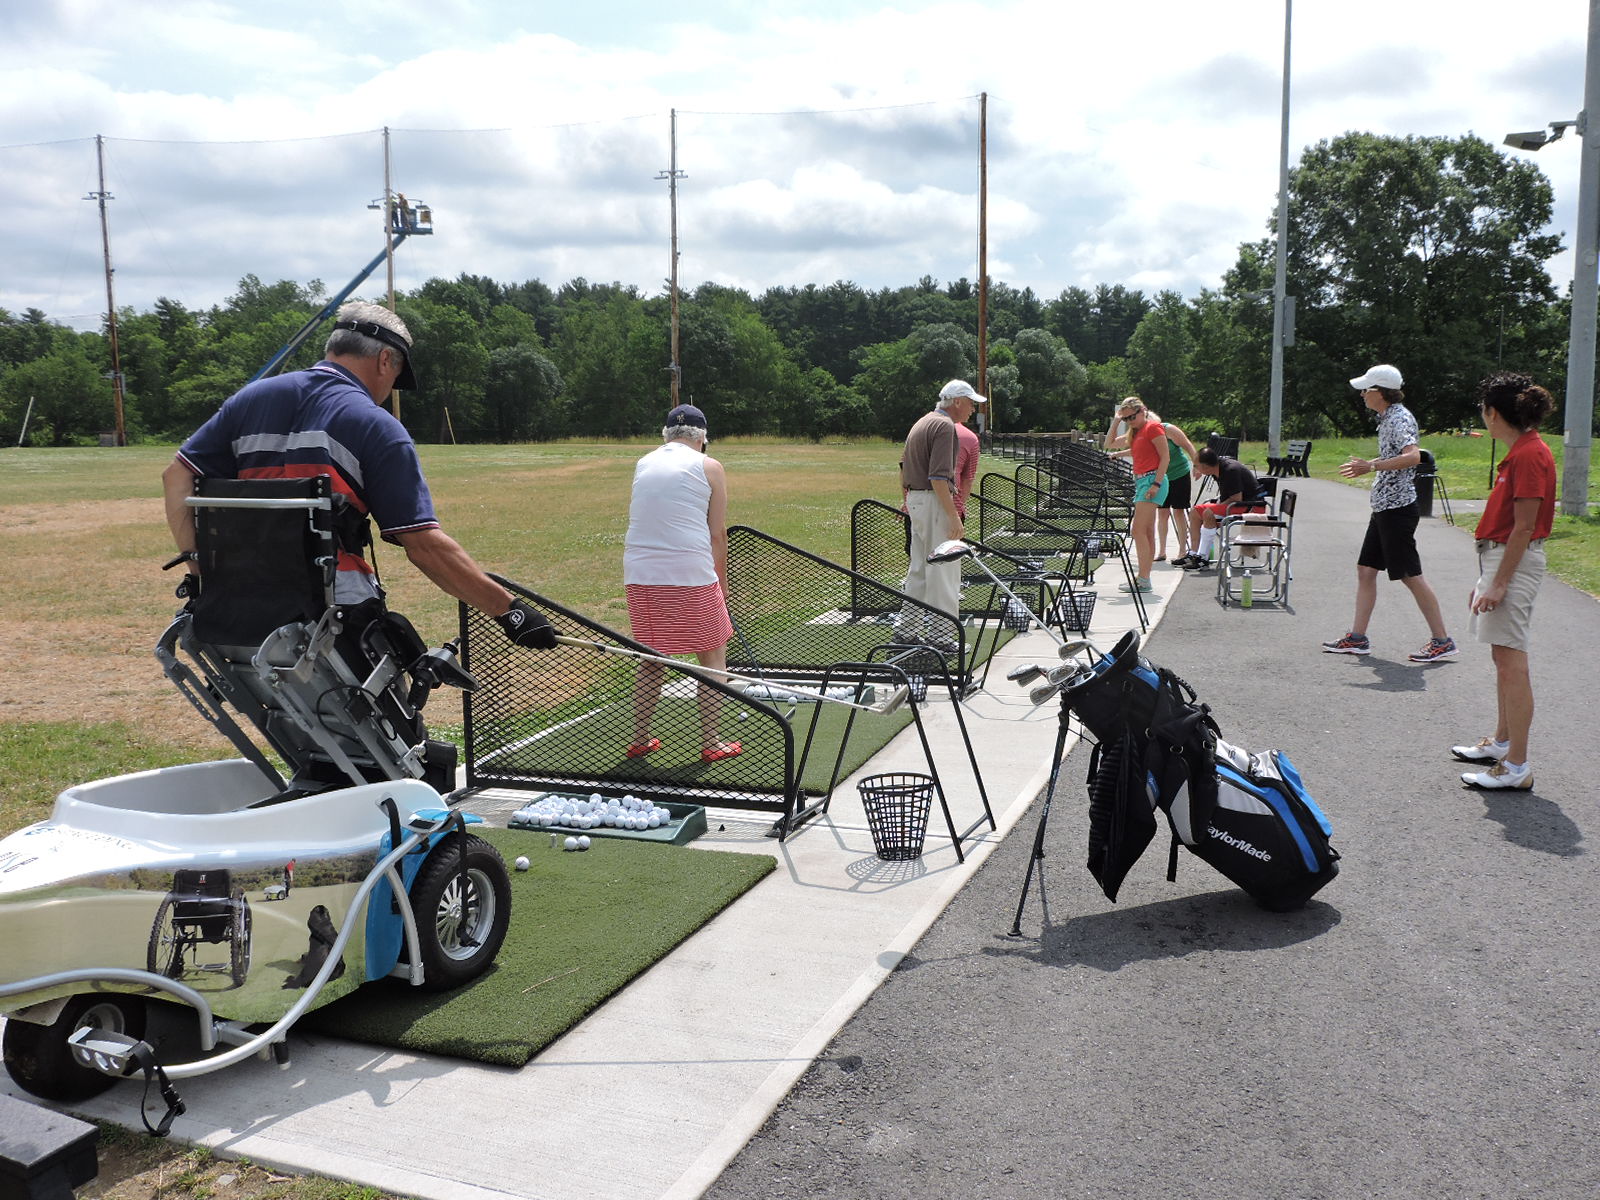 A group of people is standing on the driving range, driving golf balls. Several other people are standing behind them, watching and offering advice. One of the golfers is using a ParaGolfer to hold him upright while he swings. The reflection of a wheelchair, a service dog, and another ParaGolfer user are visible in the side of the ParaGolfer.